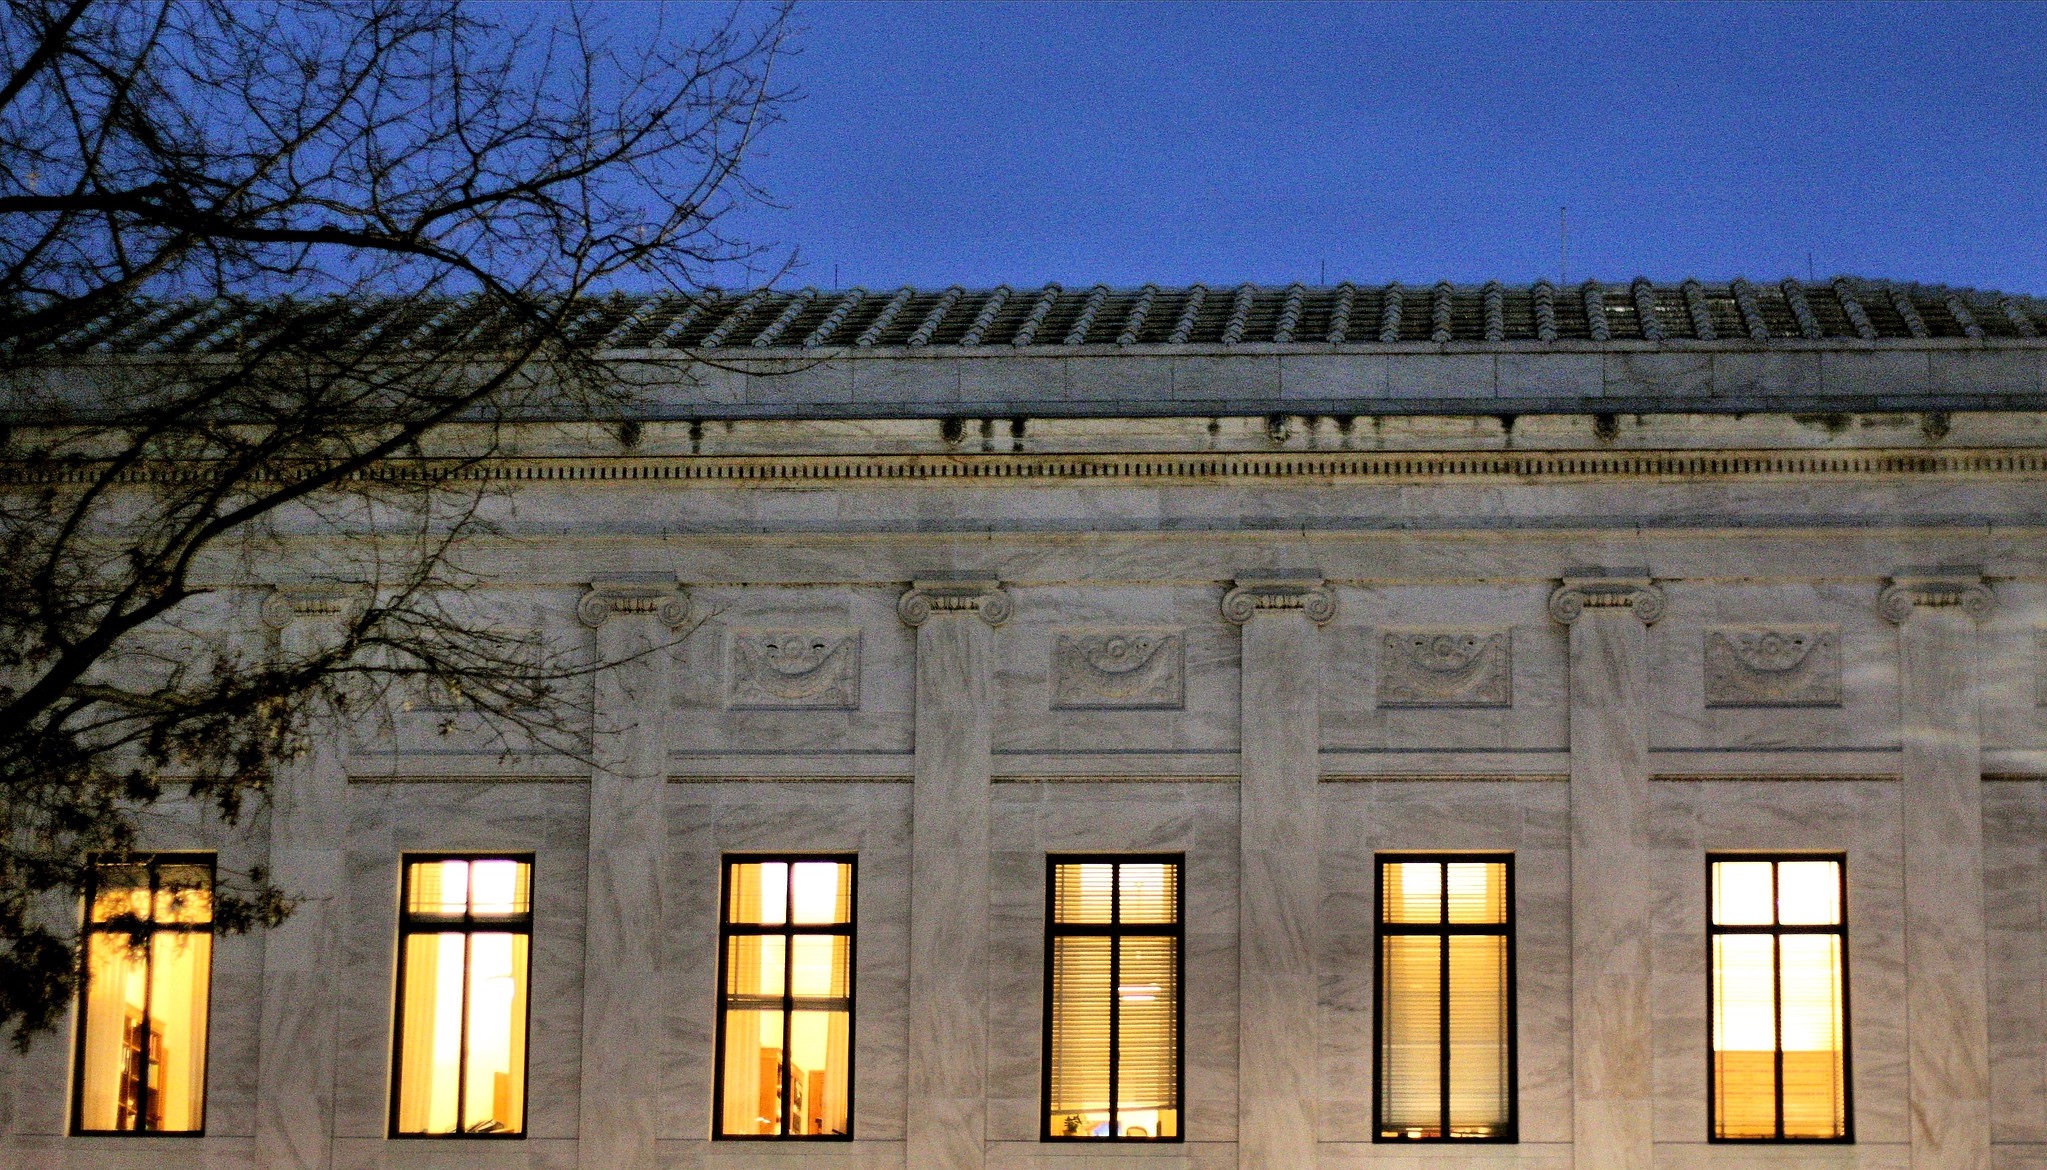 Windows in the supreme court building at night